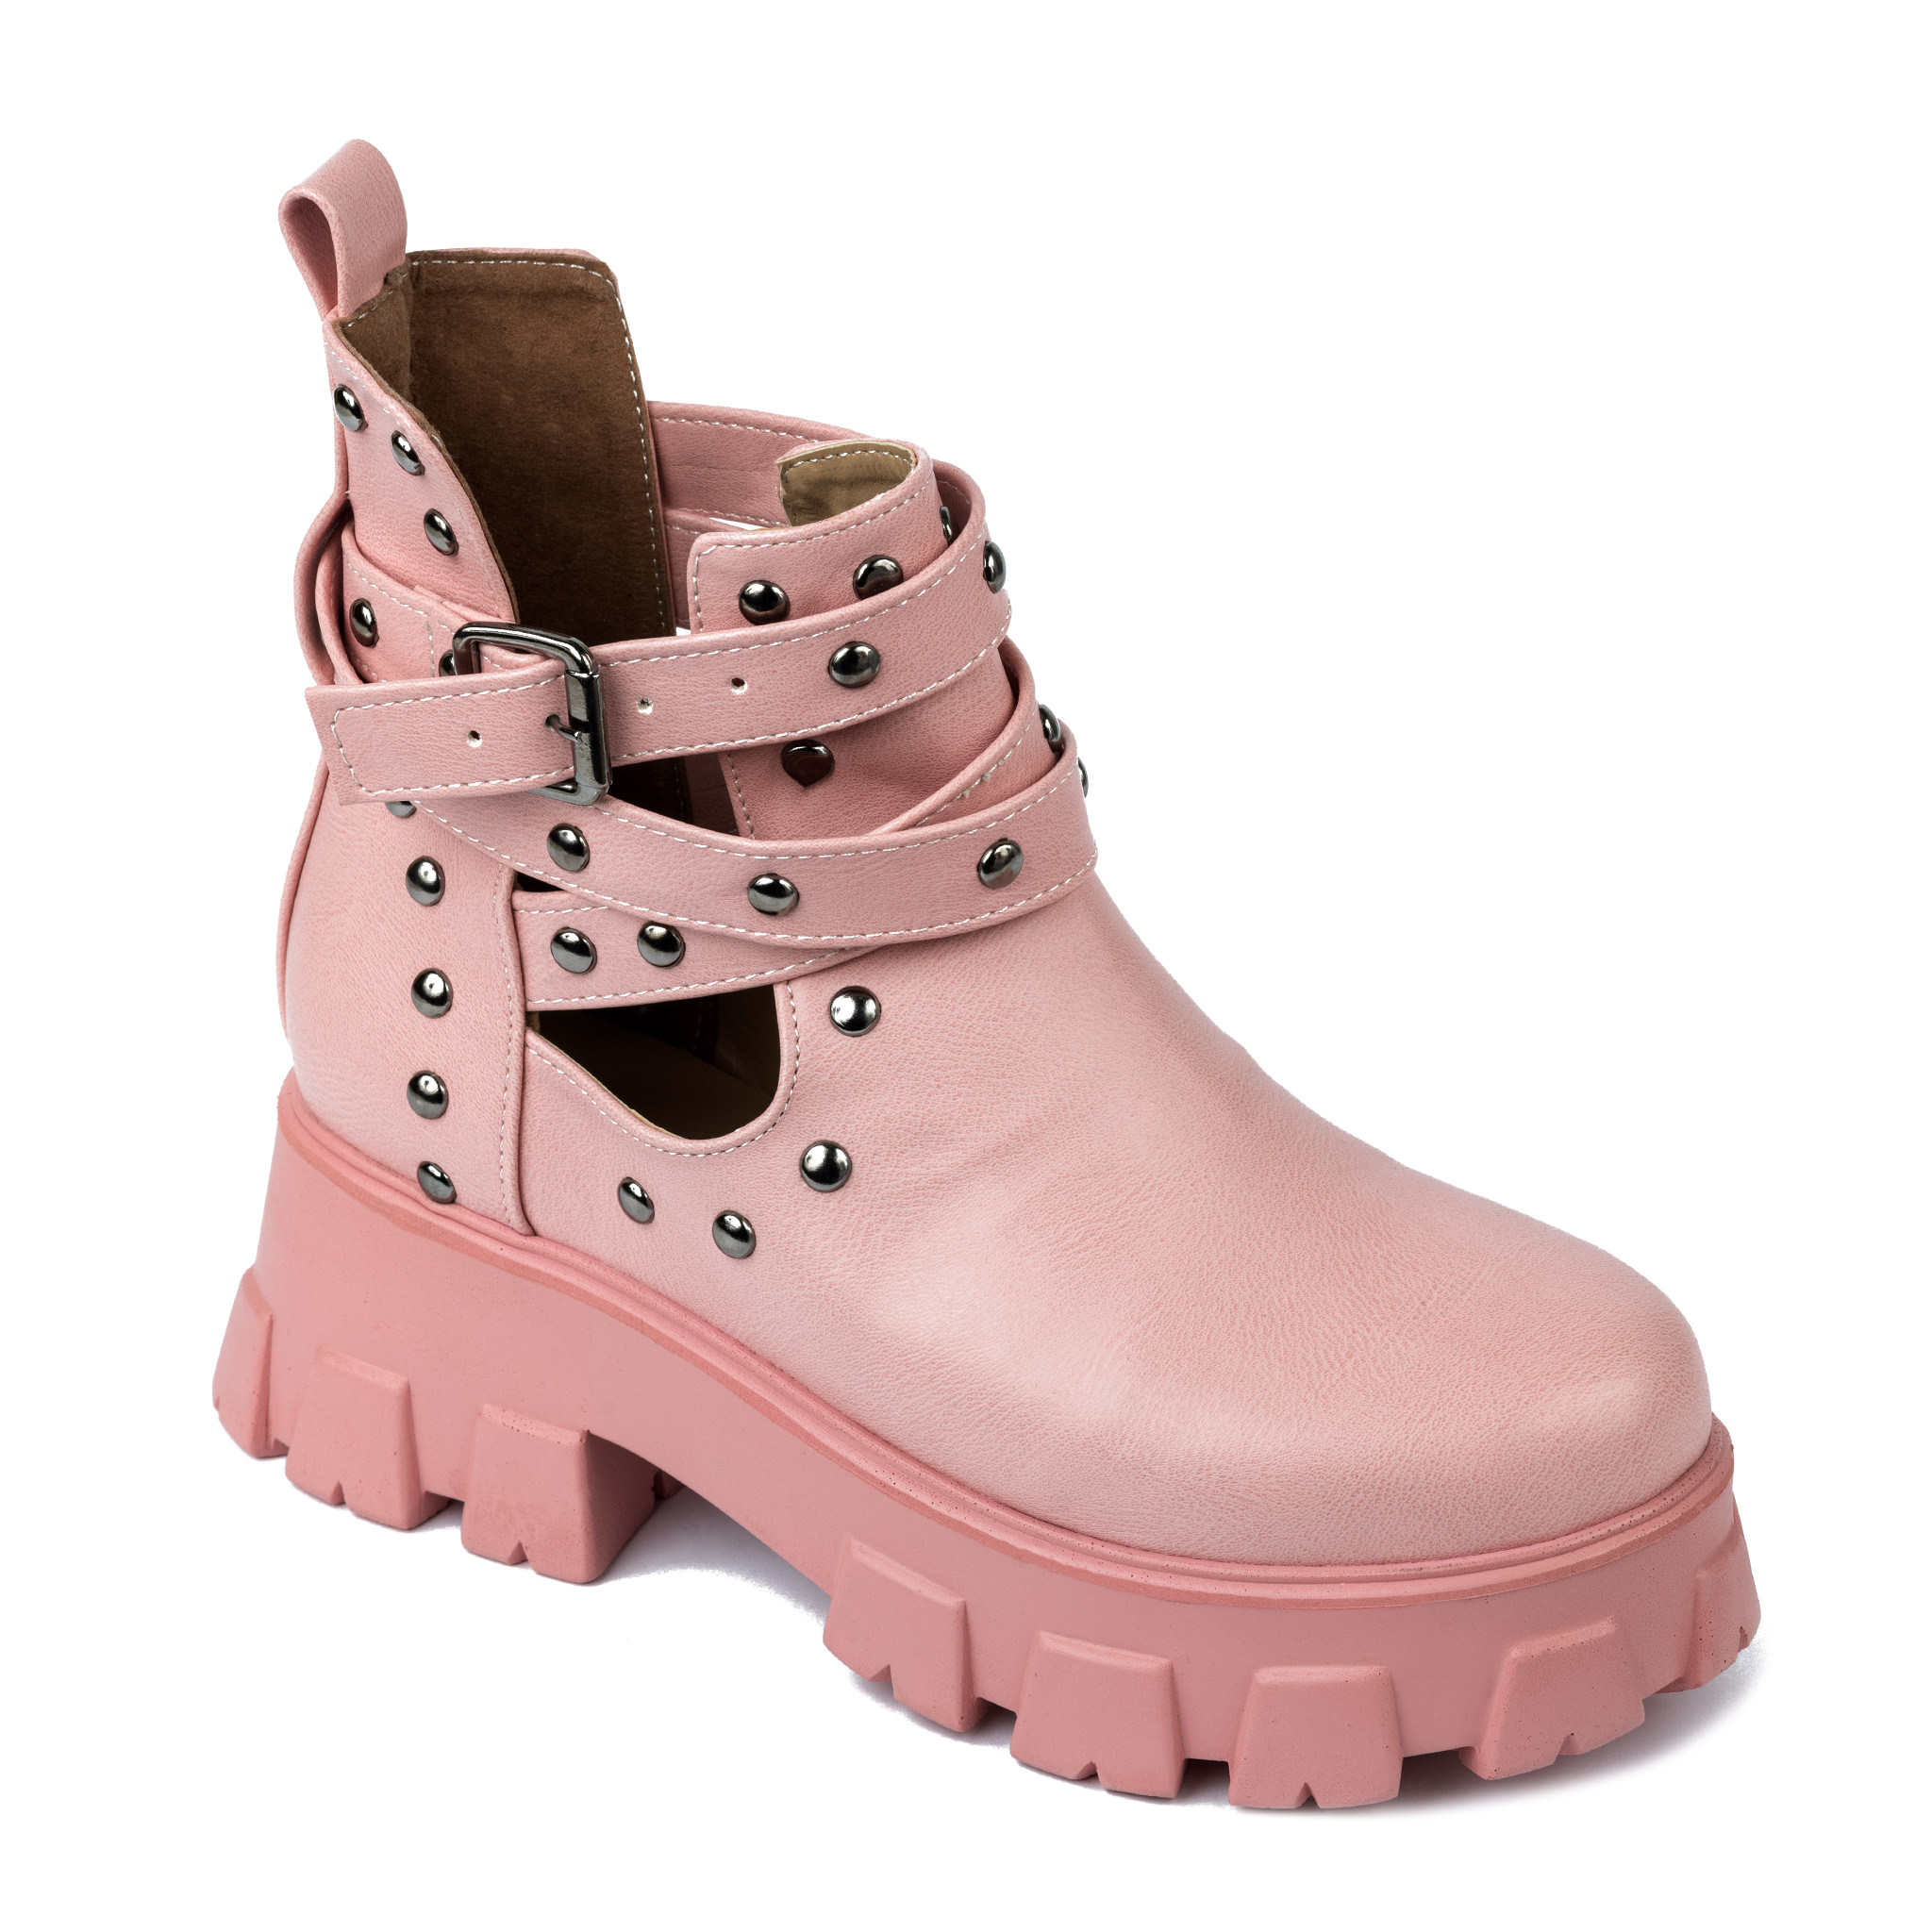 ANKLE BOOTS WITH BELTS AND RIVETS - ROSE